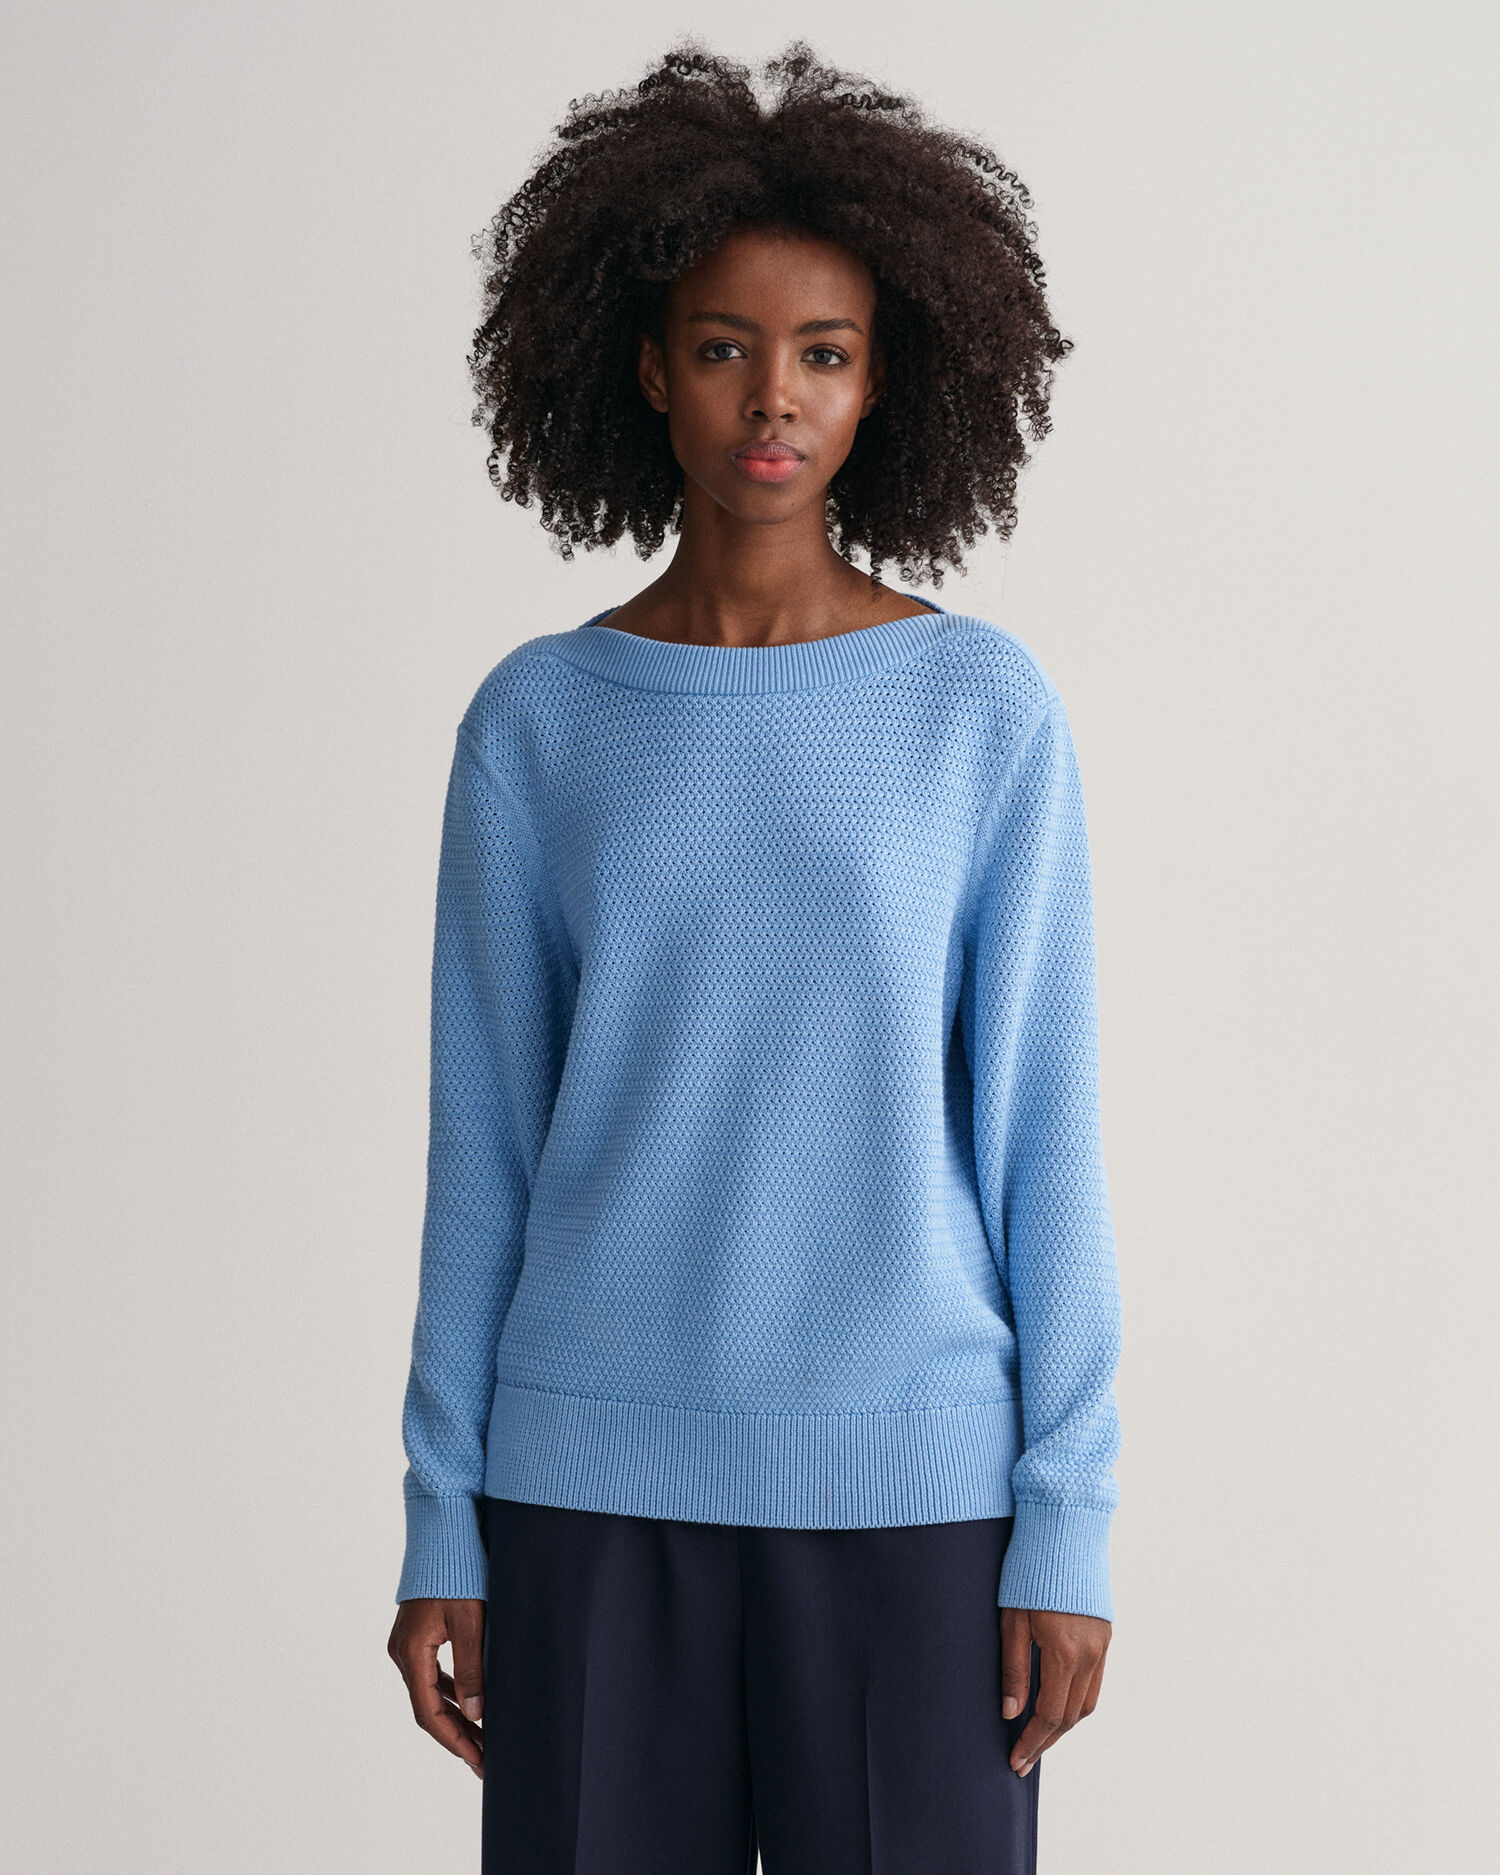 Textured Cotton Boat Neck Sweater